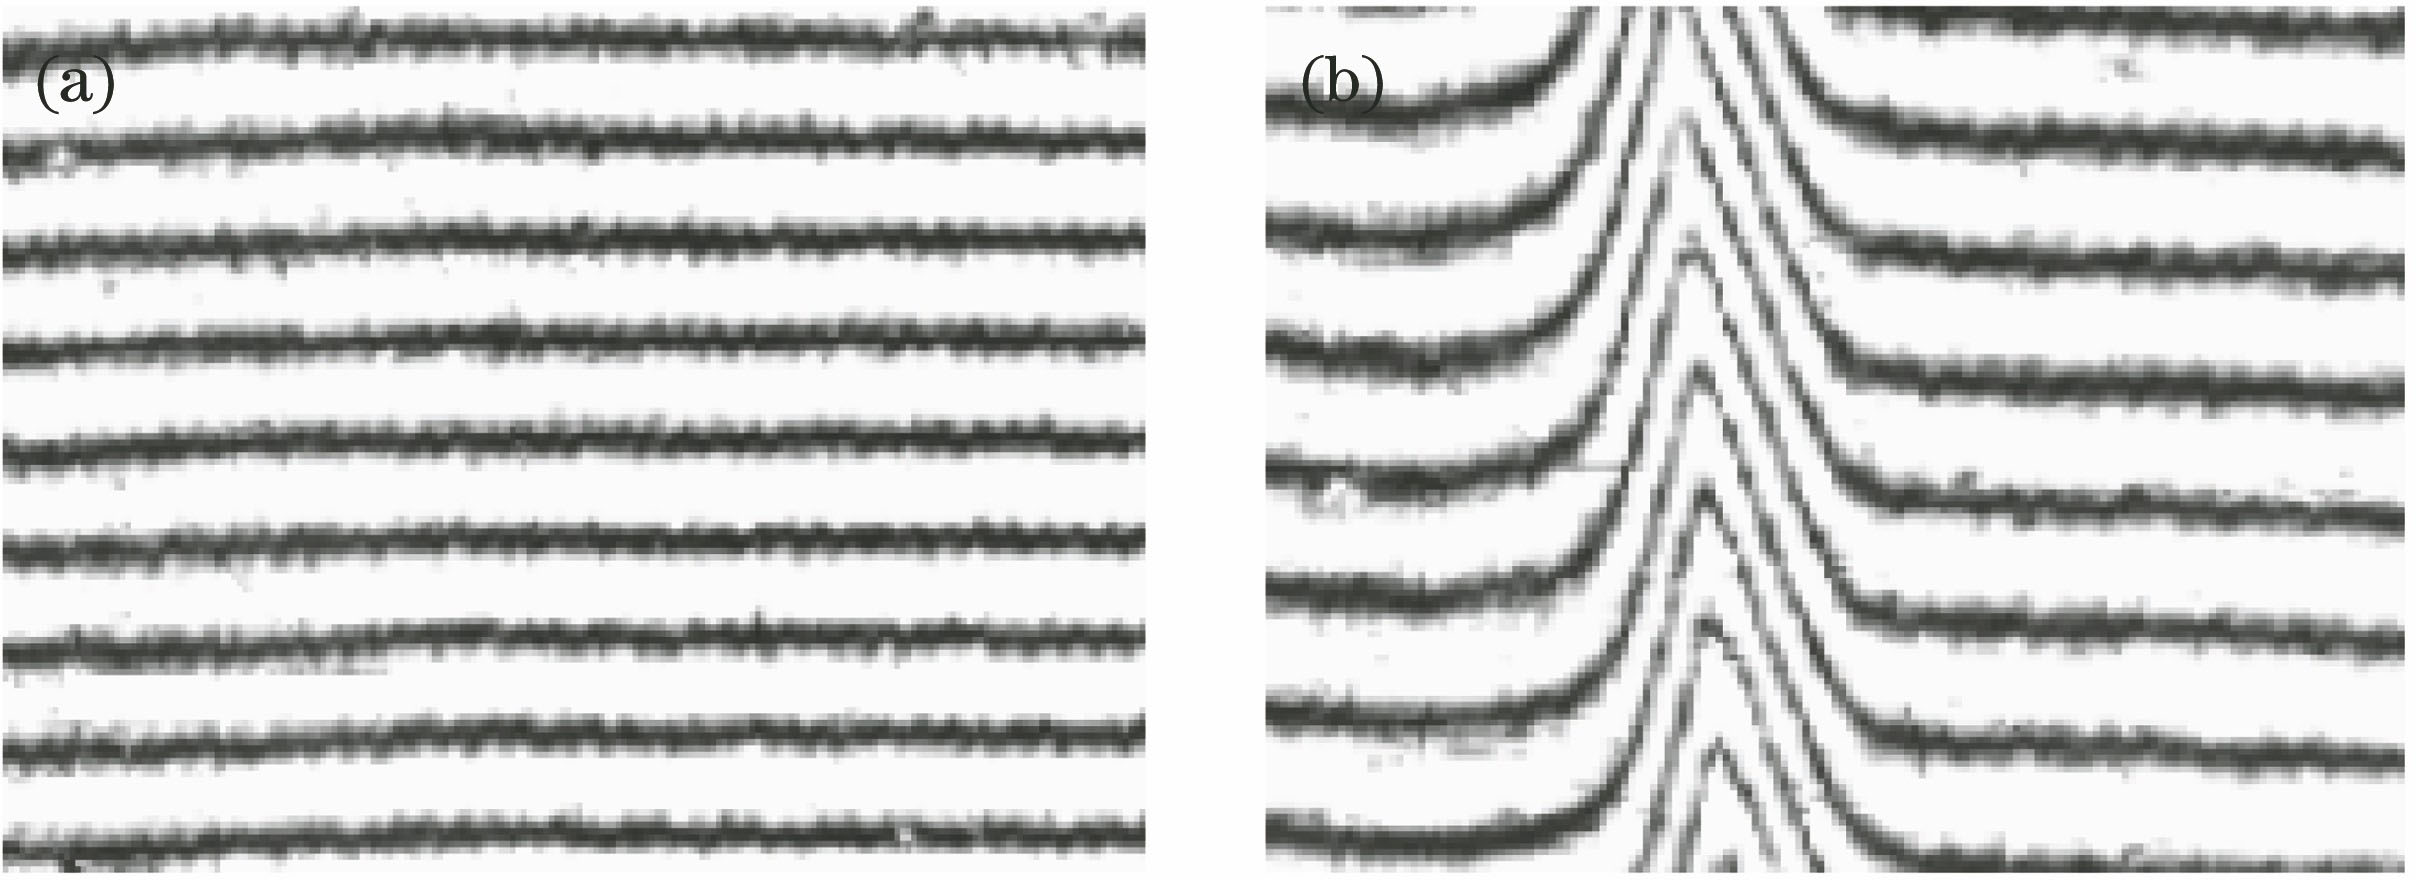 (a) Interference stripe and (b) fringe swing diagram